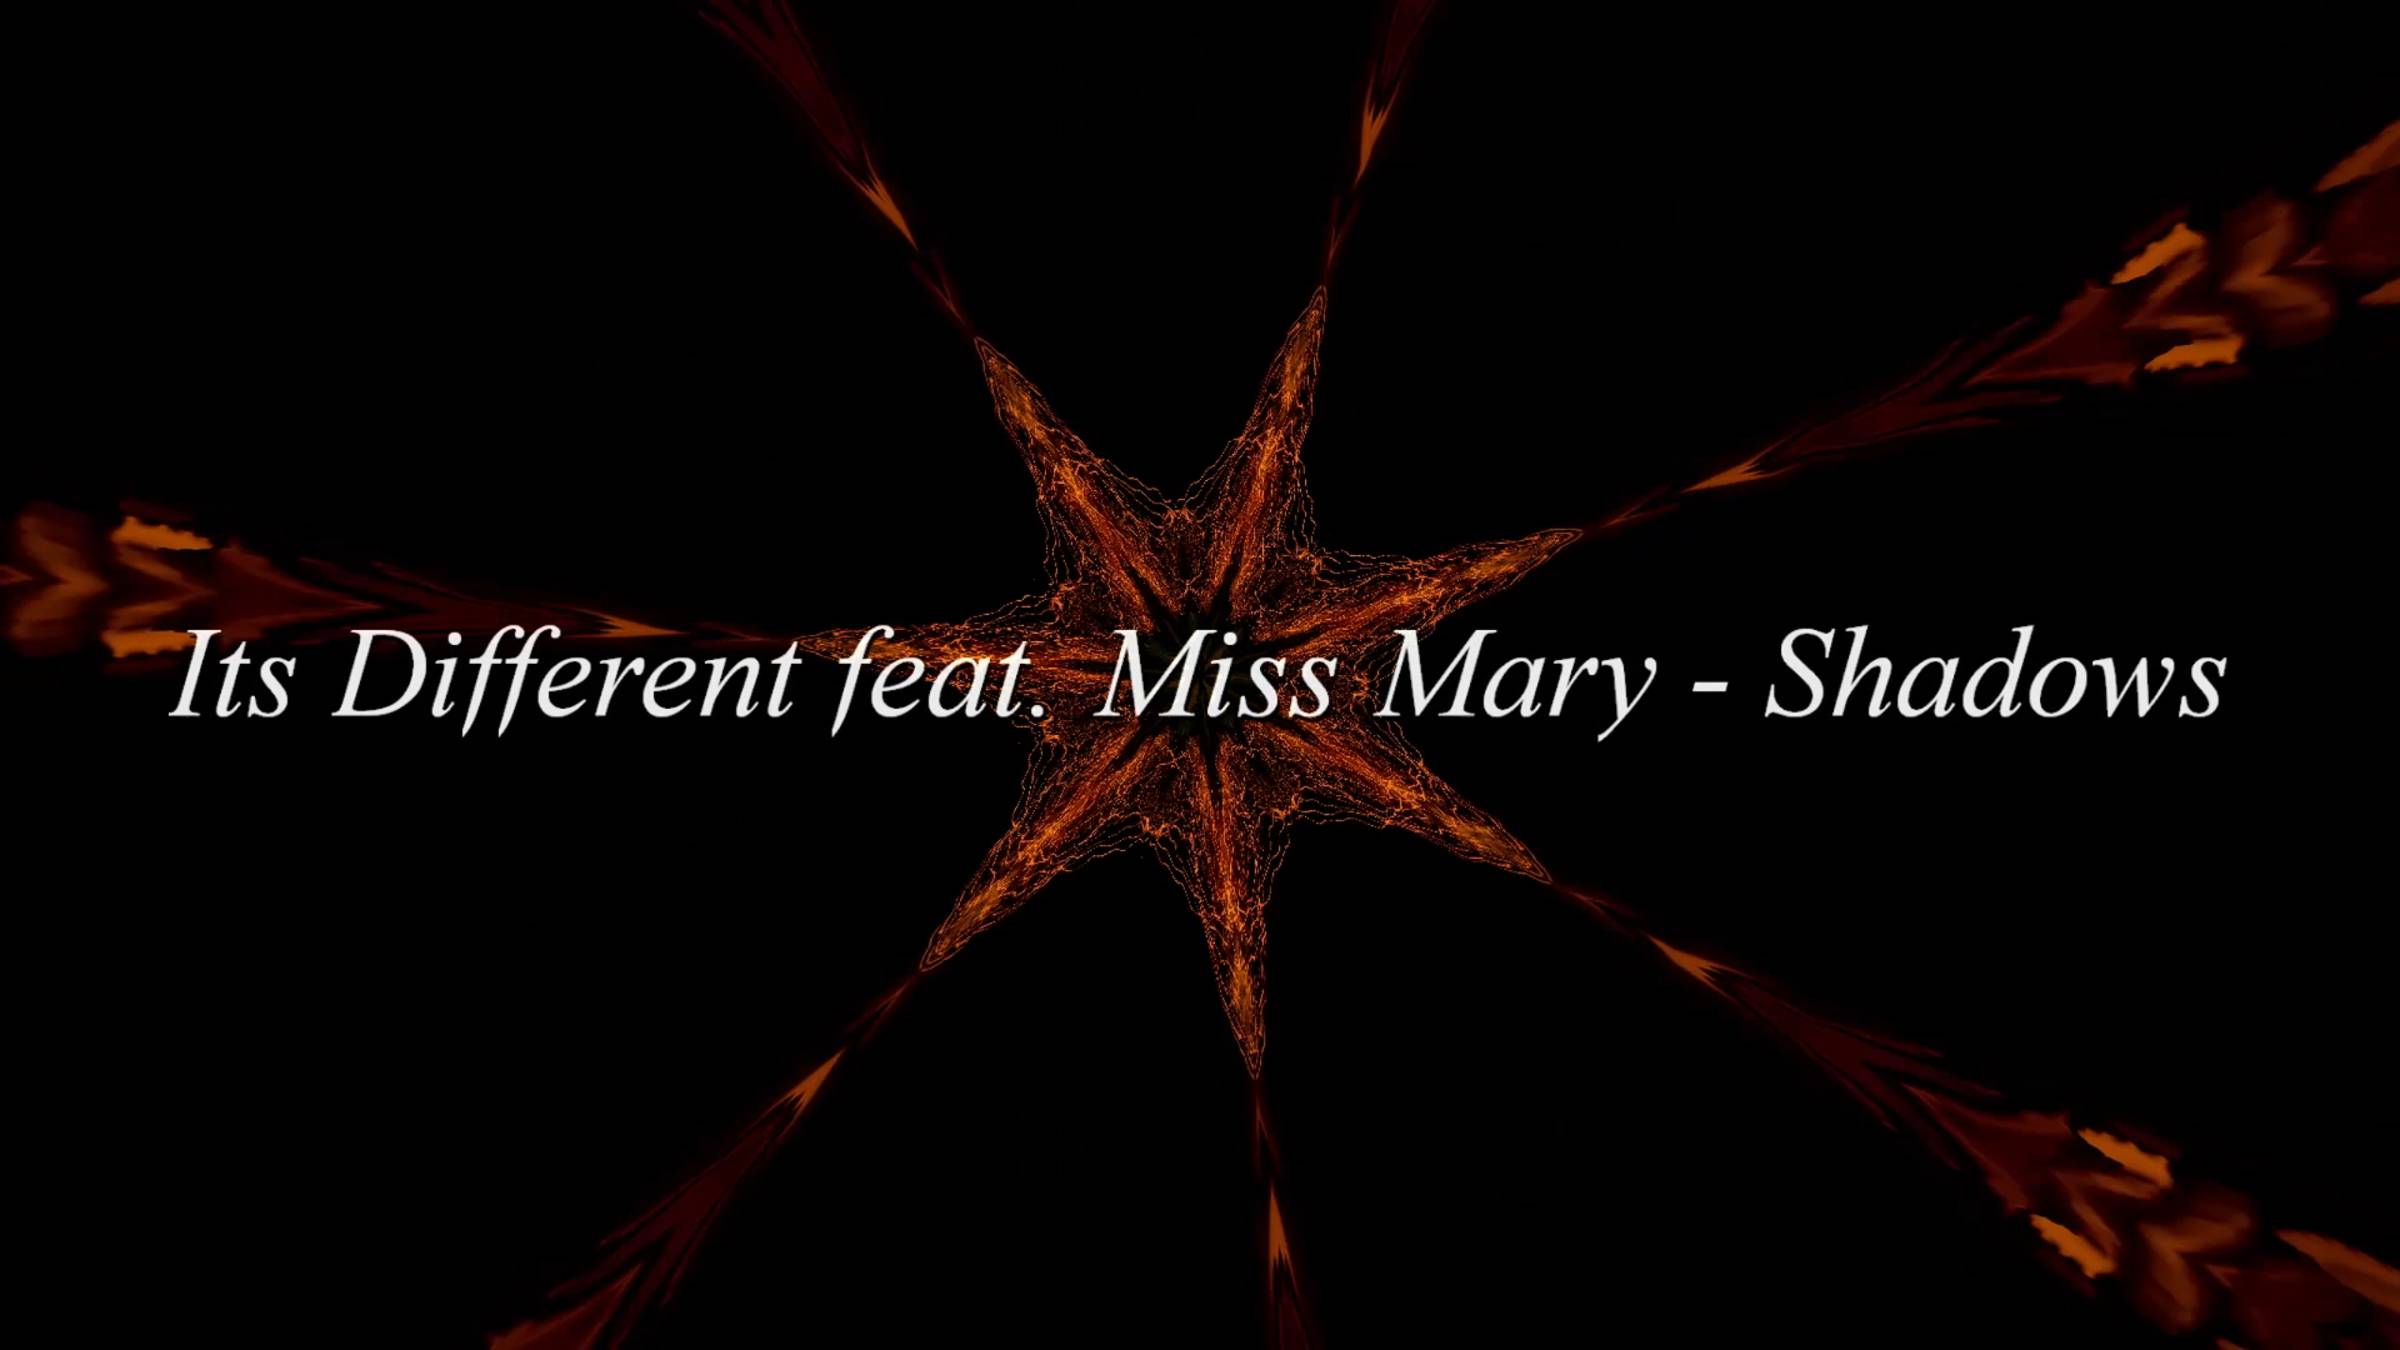 Its Different feat. Miss Mary - Shadows